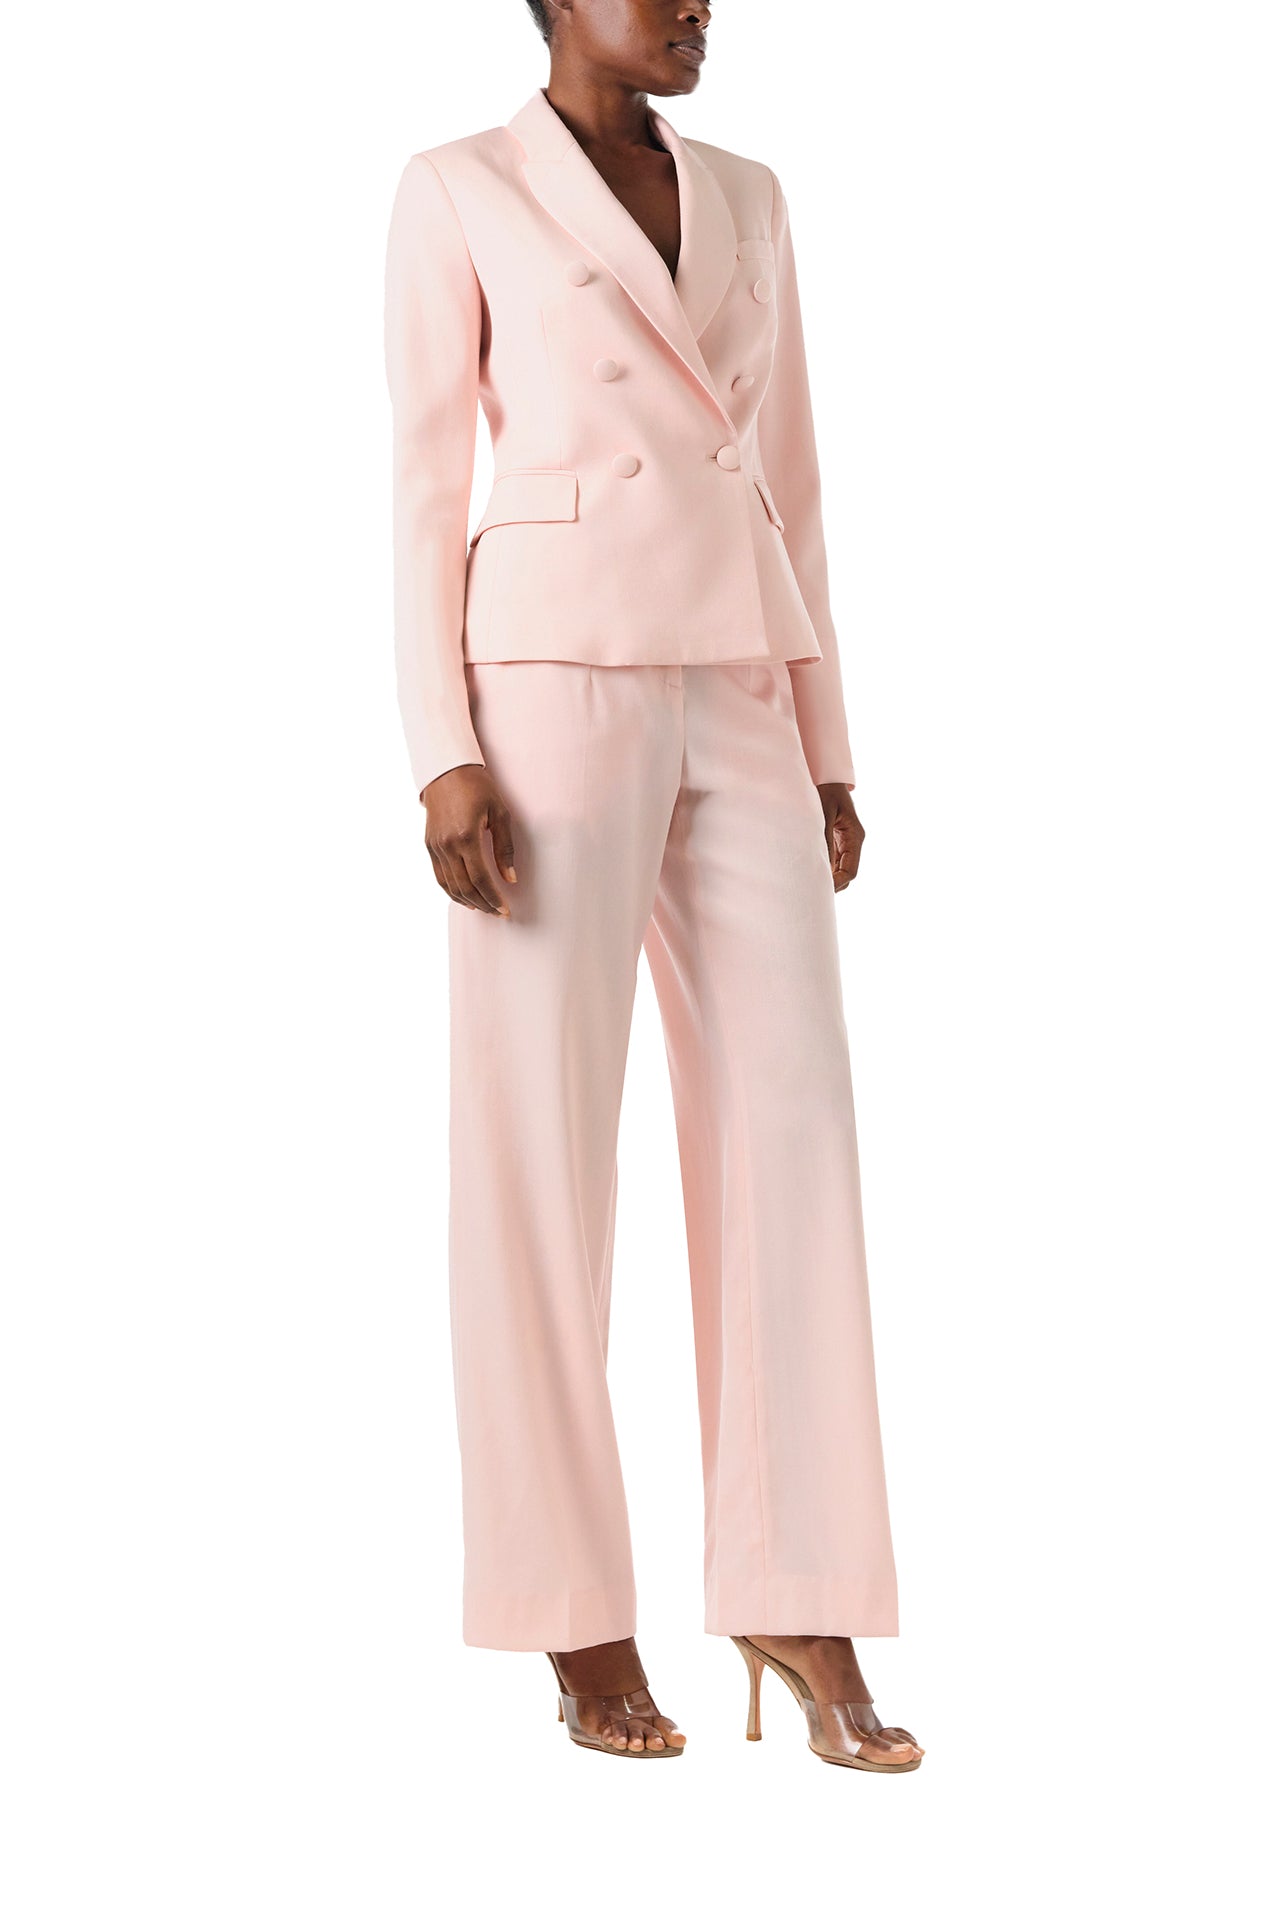 Monique Lhuillier Fall 2024 pale blush wool, double breasted wool blazer with full length sleeve - right side.